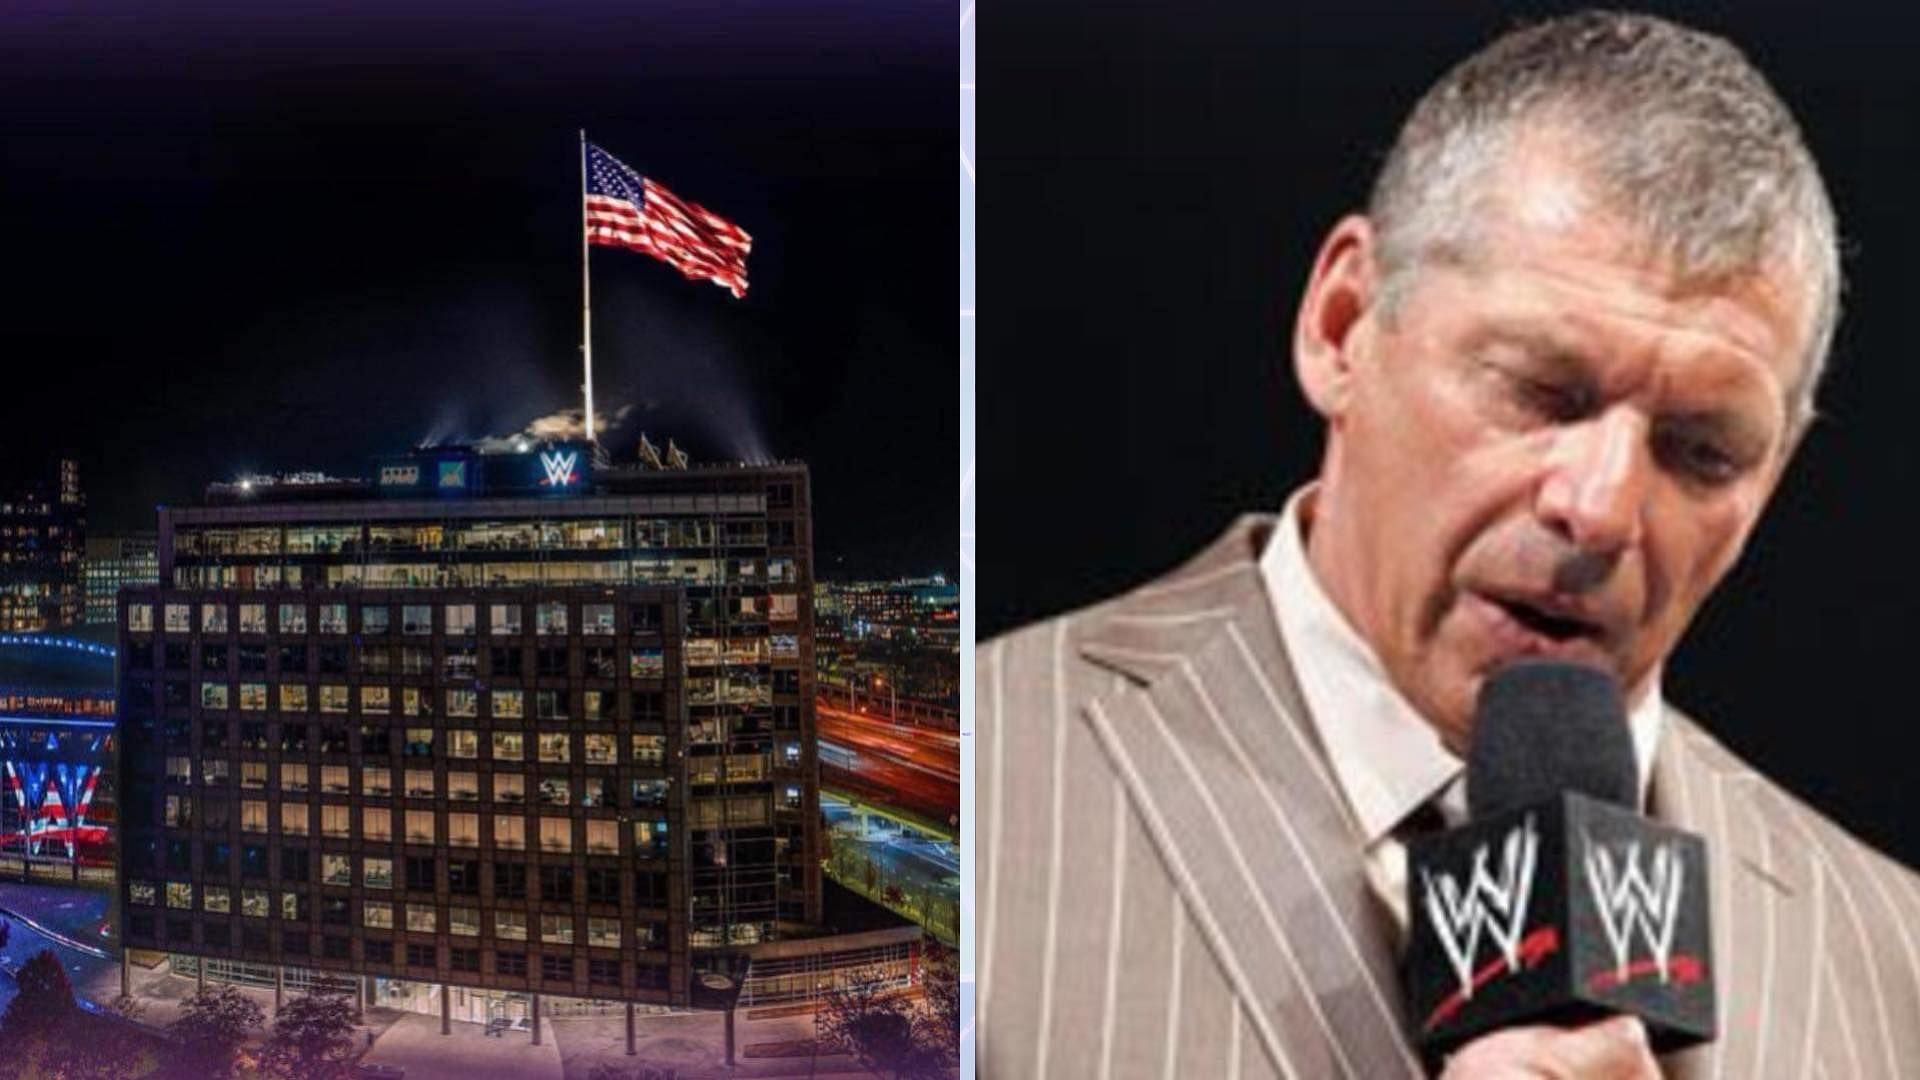 Vince McMahon is the former WWE Chairman